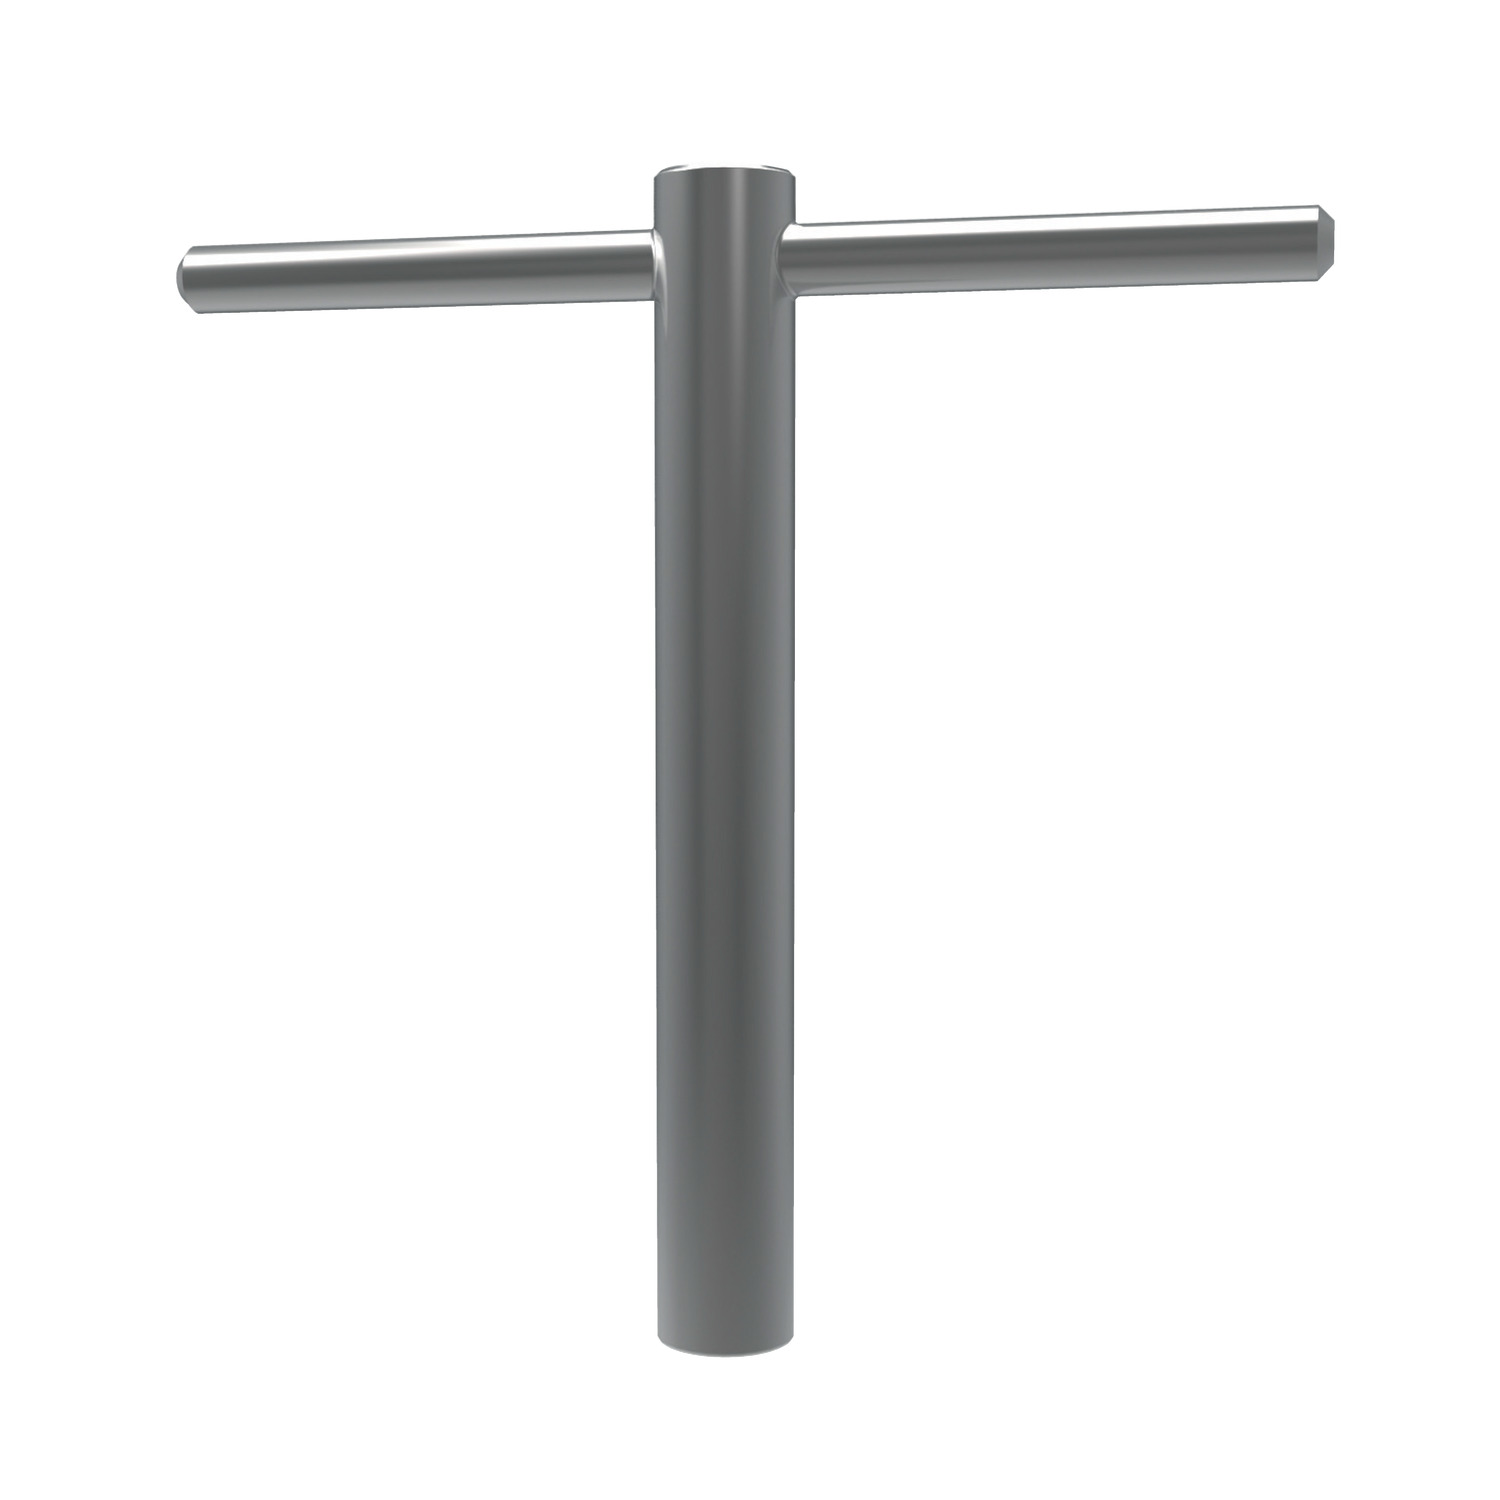 92010.W0009 T-Wrench, Square Drive (Long) - Steel. 9 - 18 - 9,0 - 200